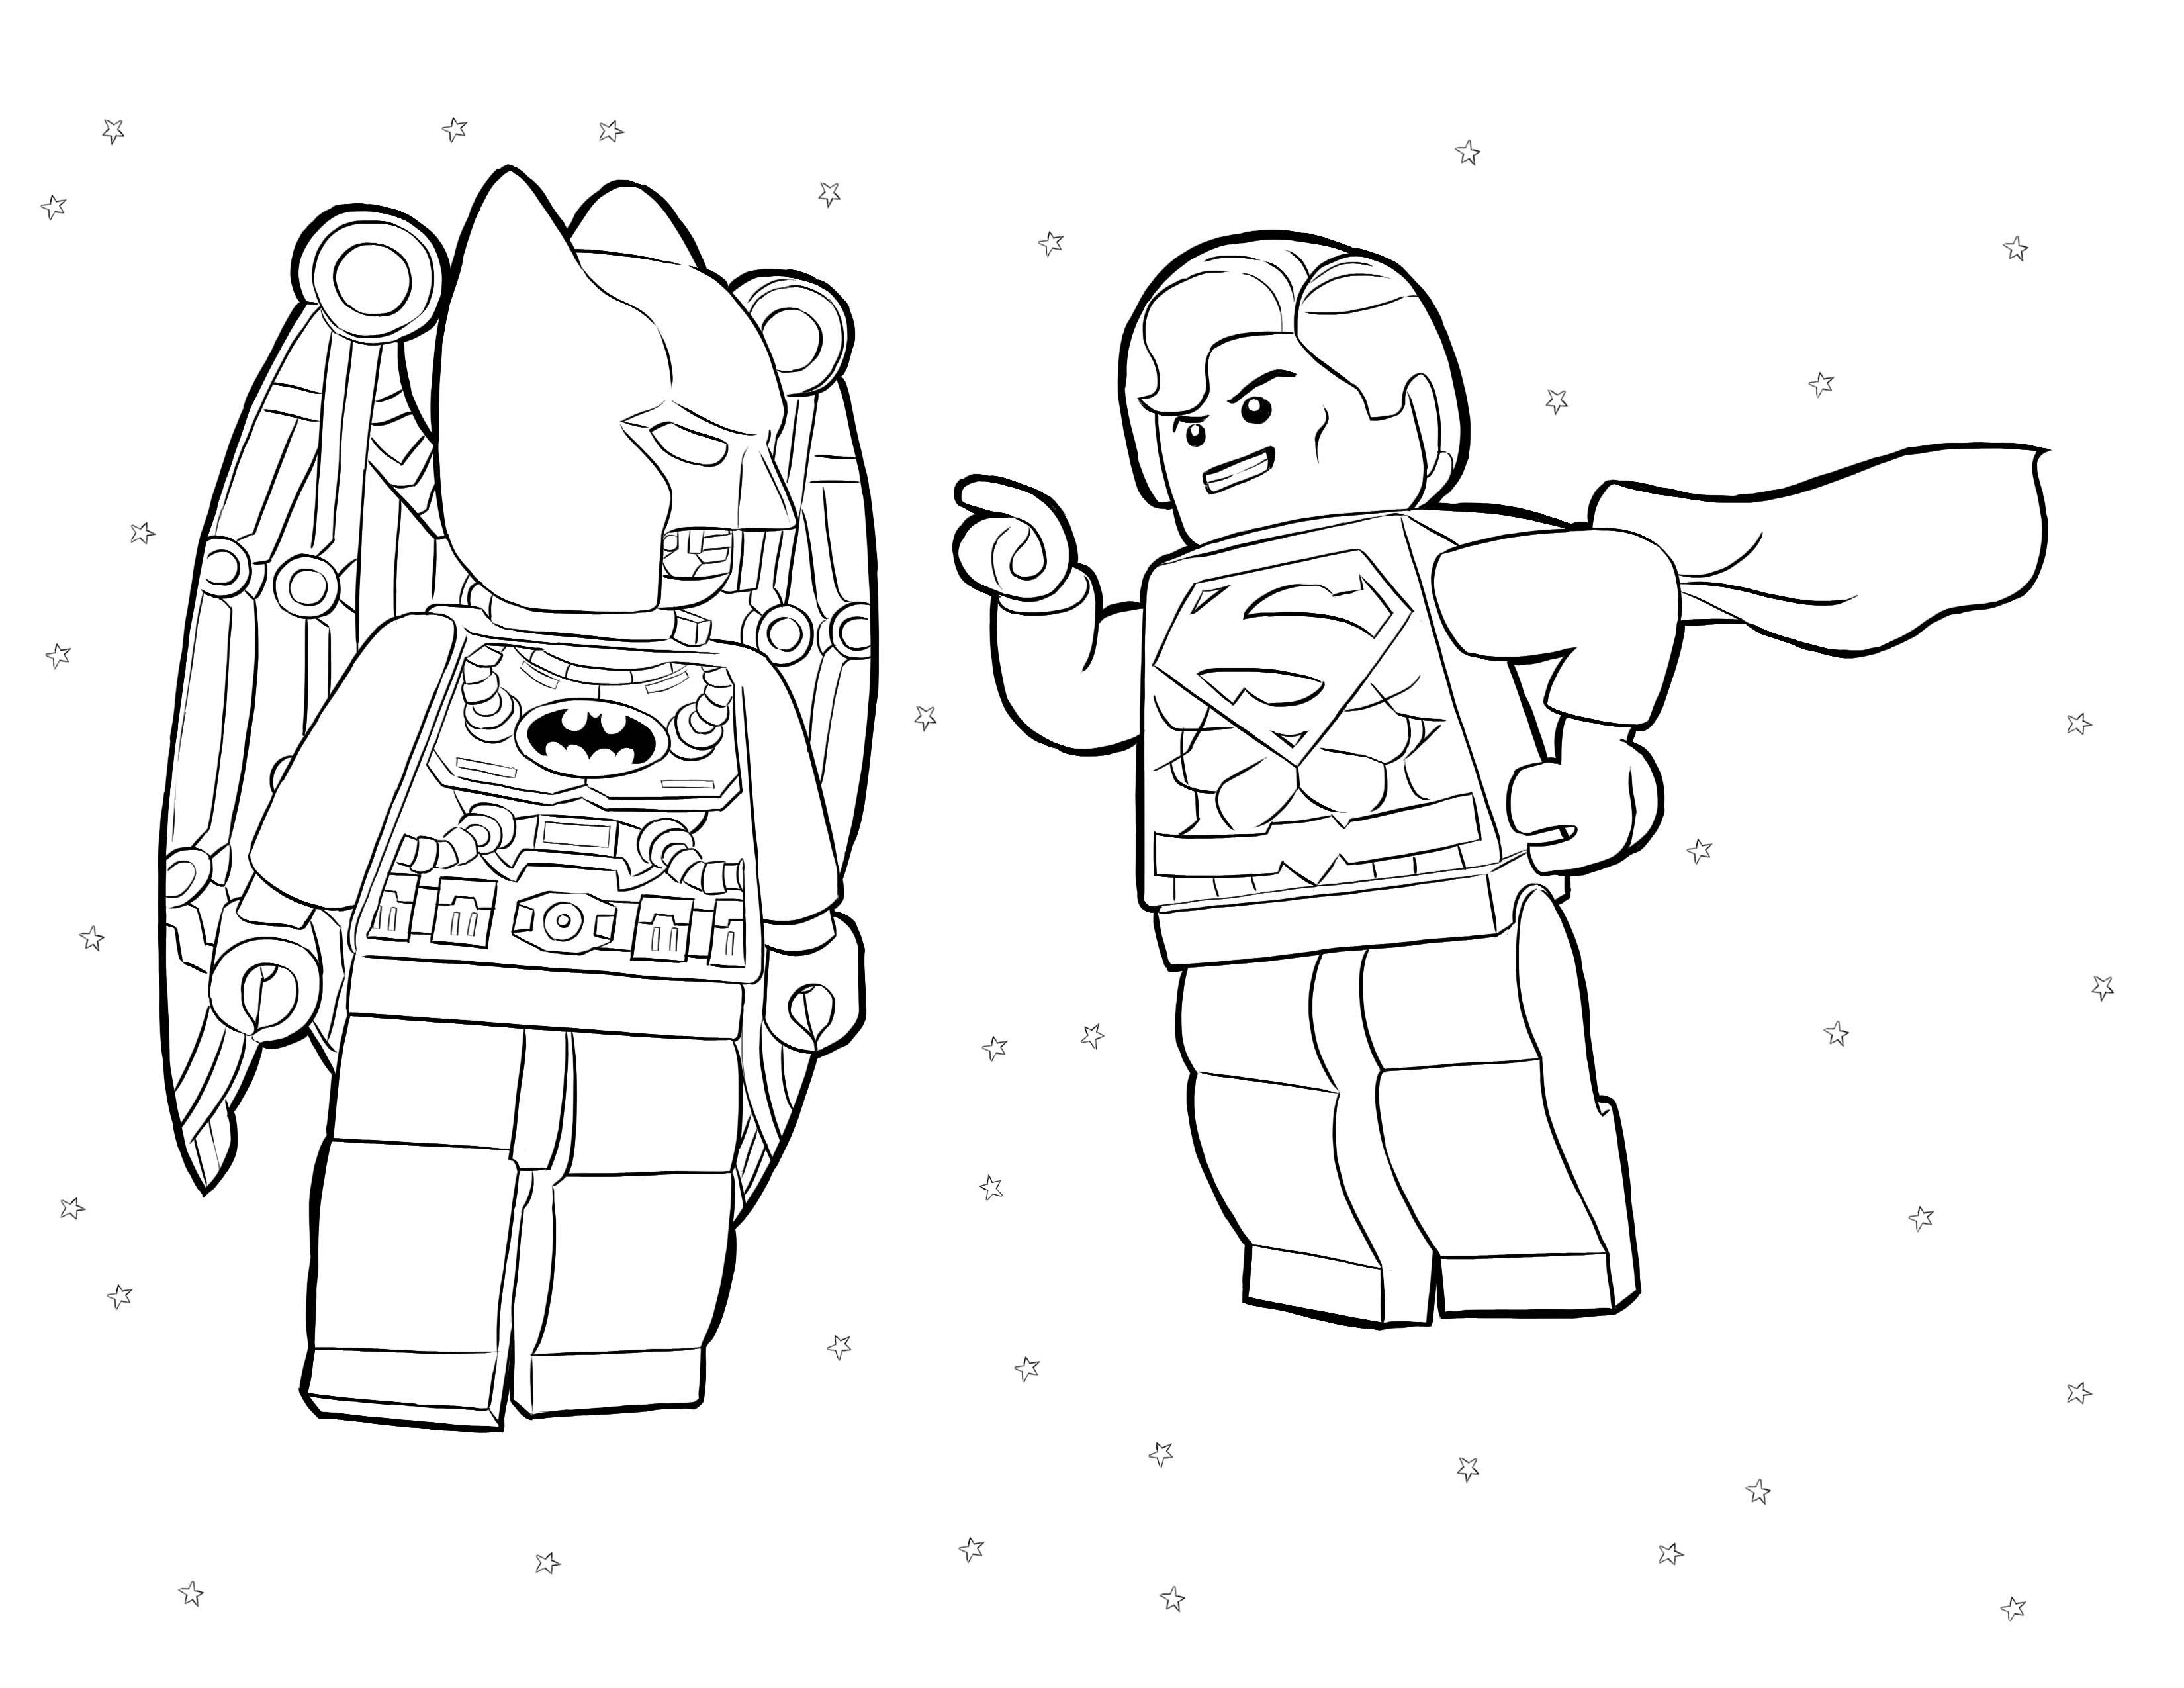 The Lego Batman Movie Coloring Pages to download and print